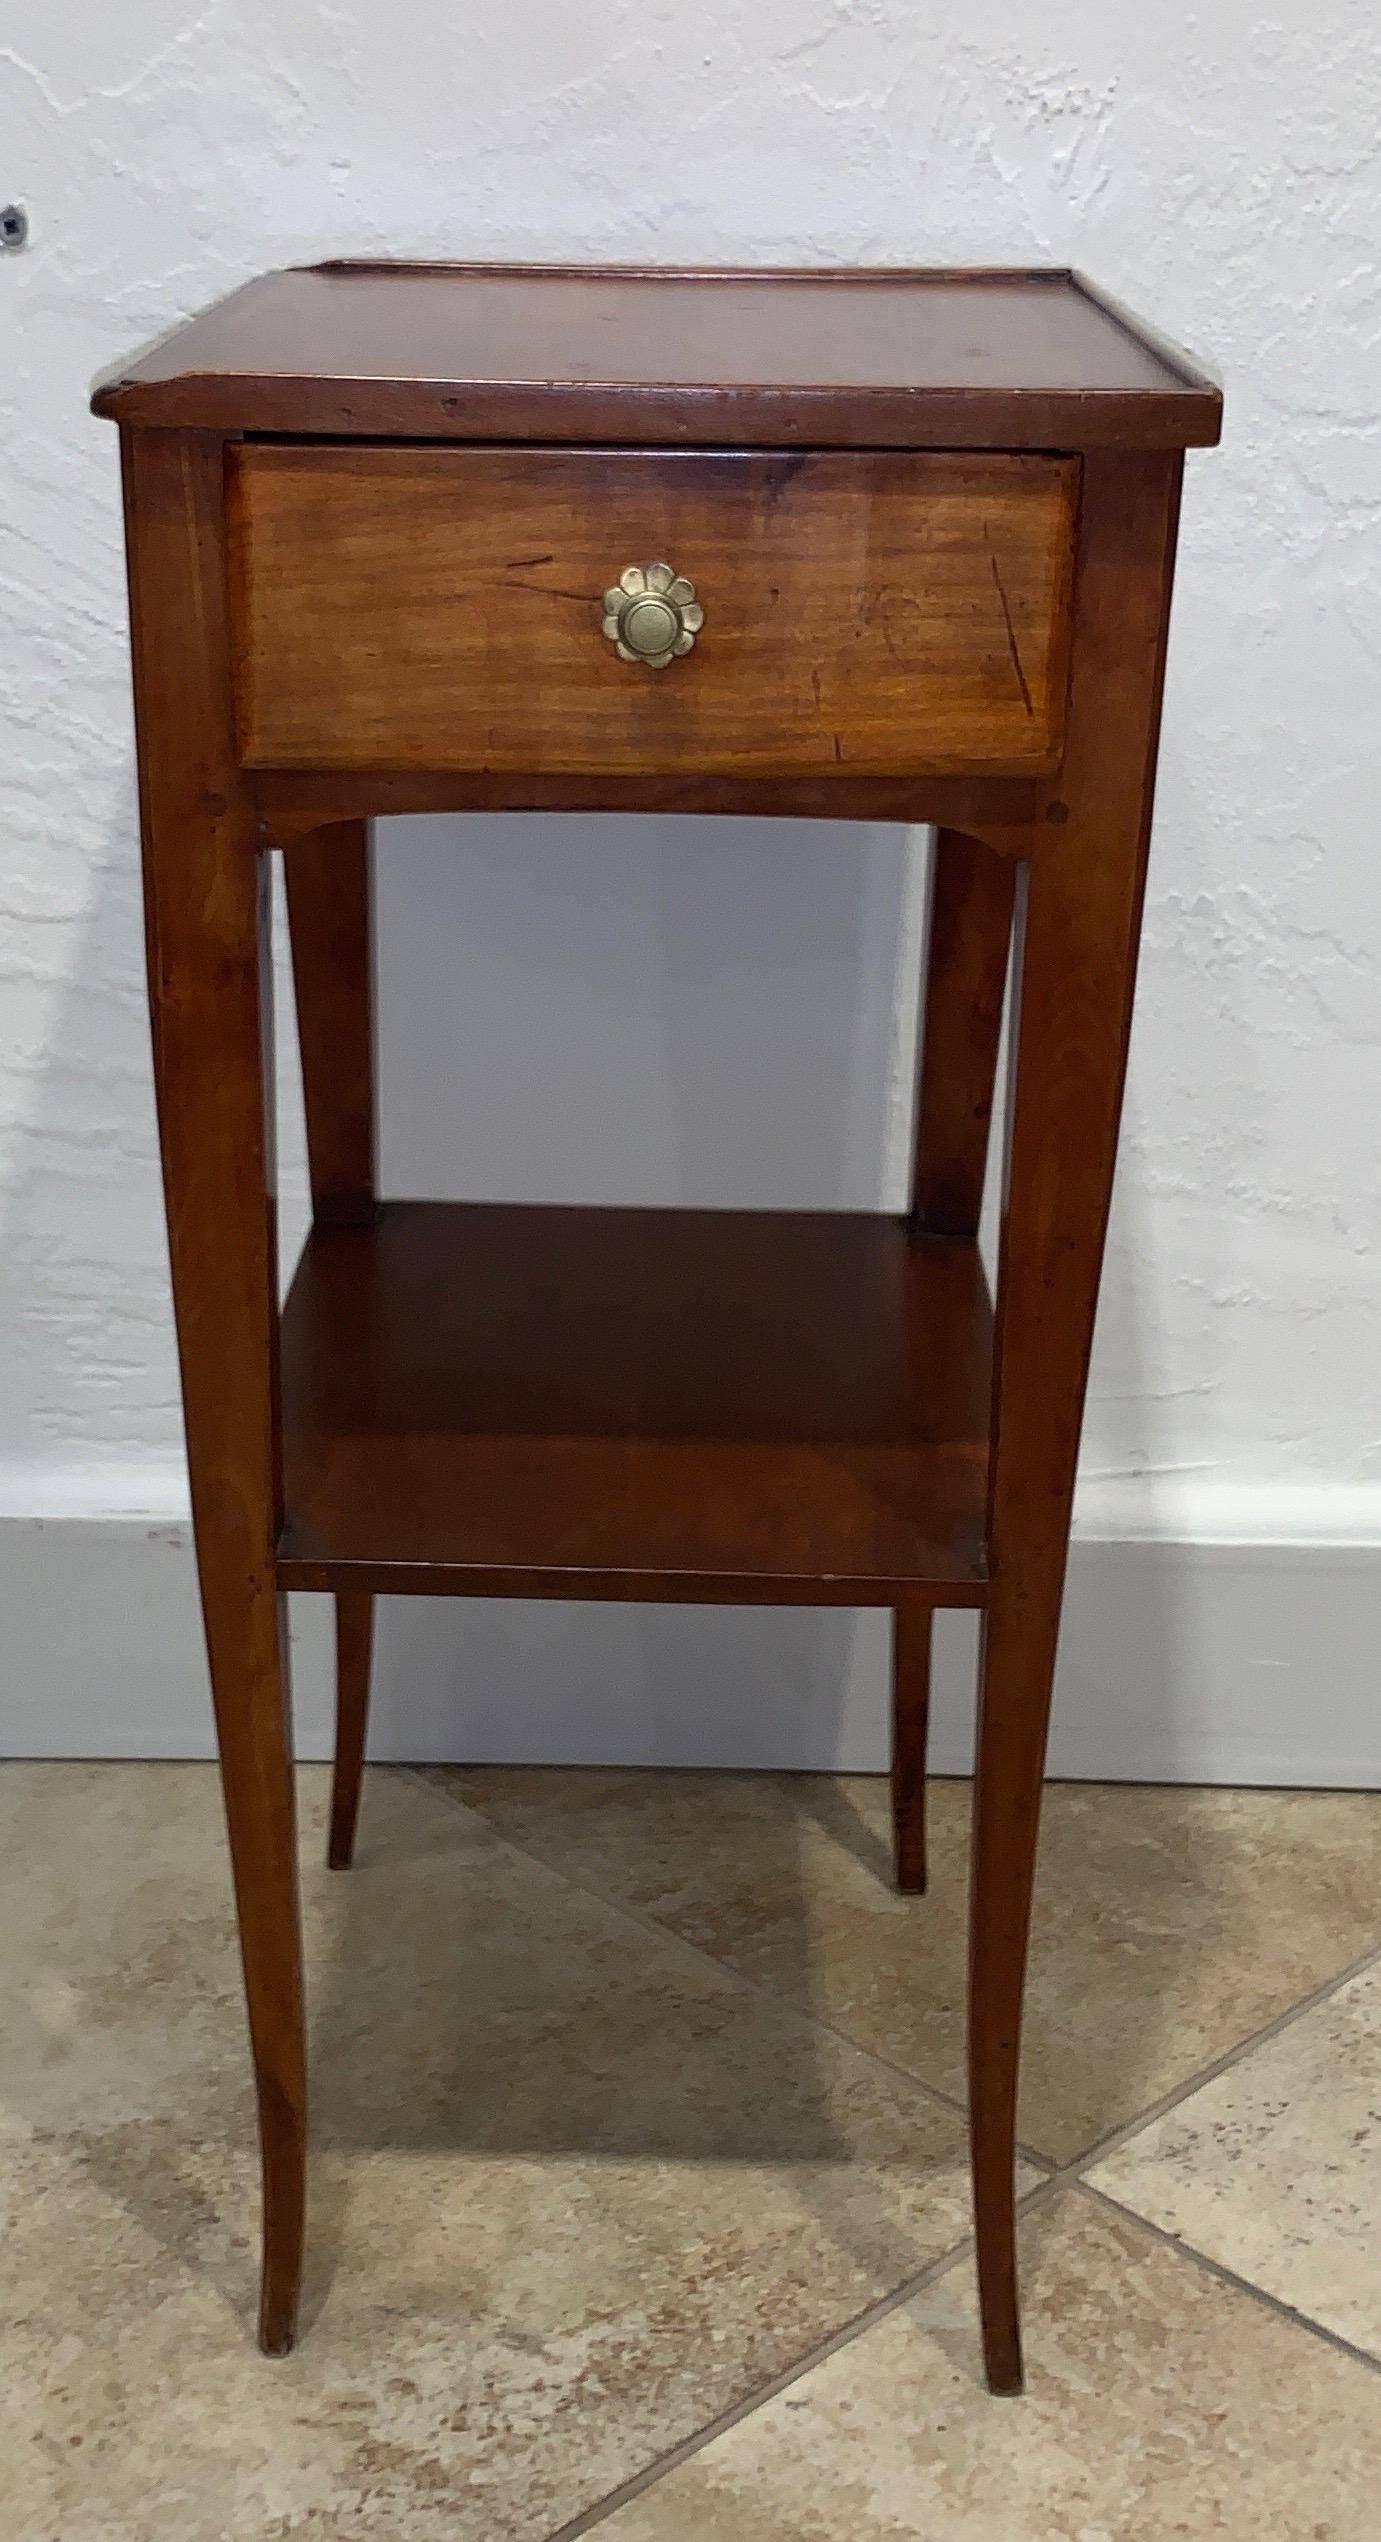 1830s French Provincial walnut side table. Shelf underneath with a drawer on the side.